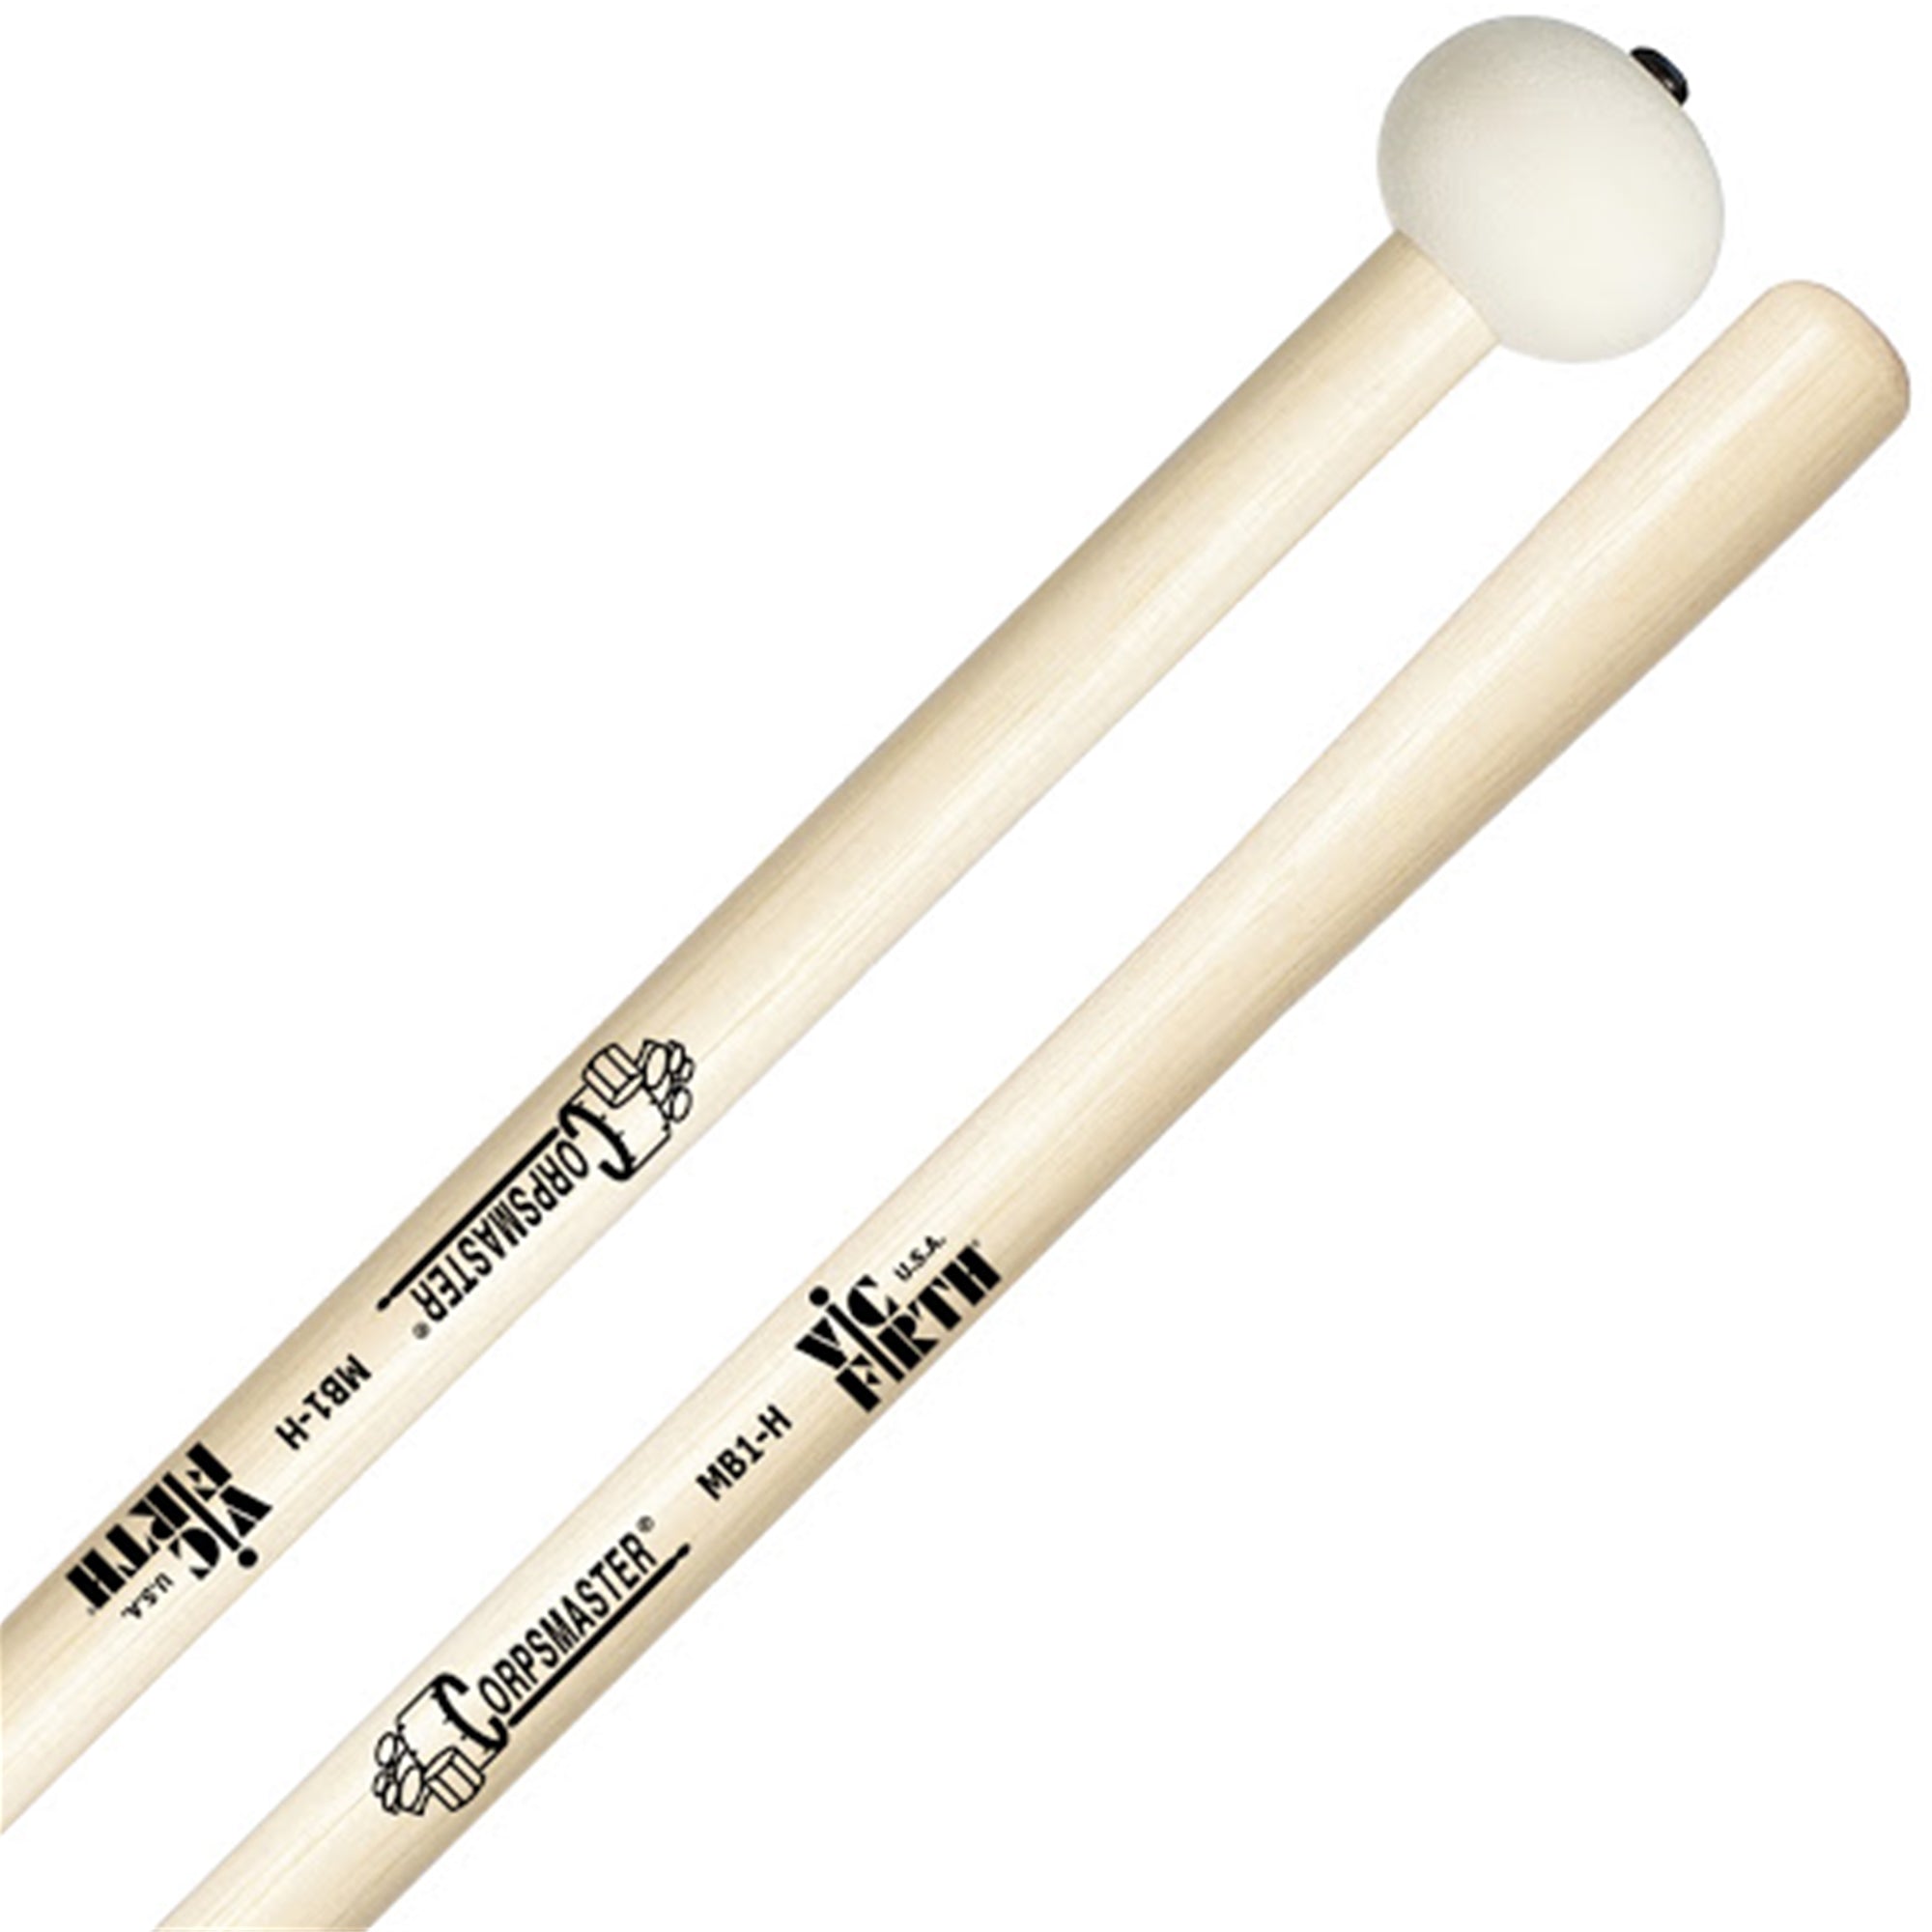 VIC FIRTH VFMB1H Corpsmaster Marching Bass Mallets, Small